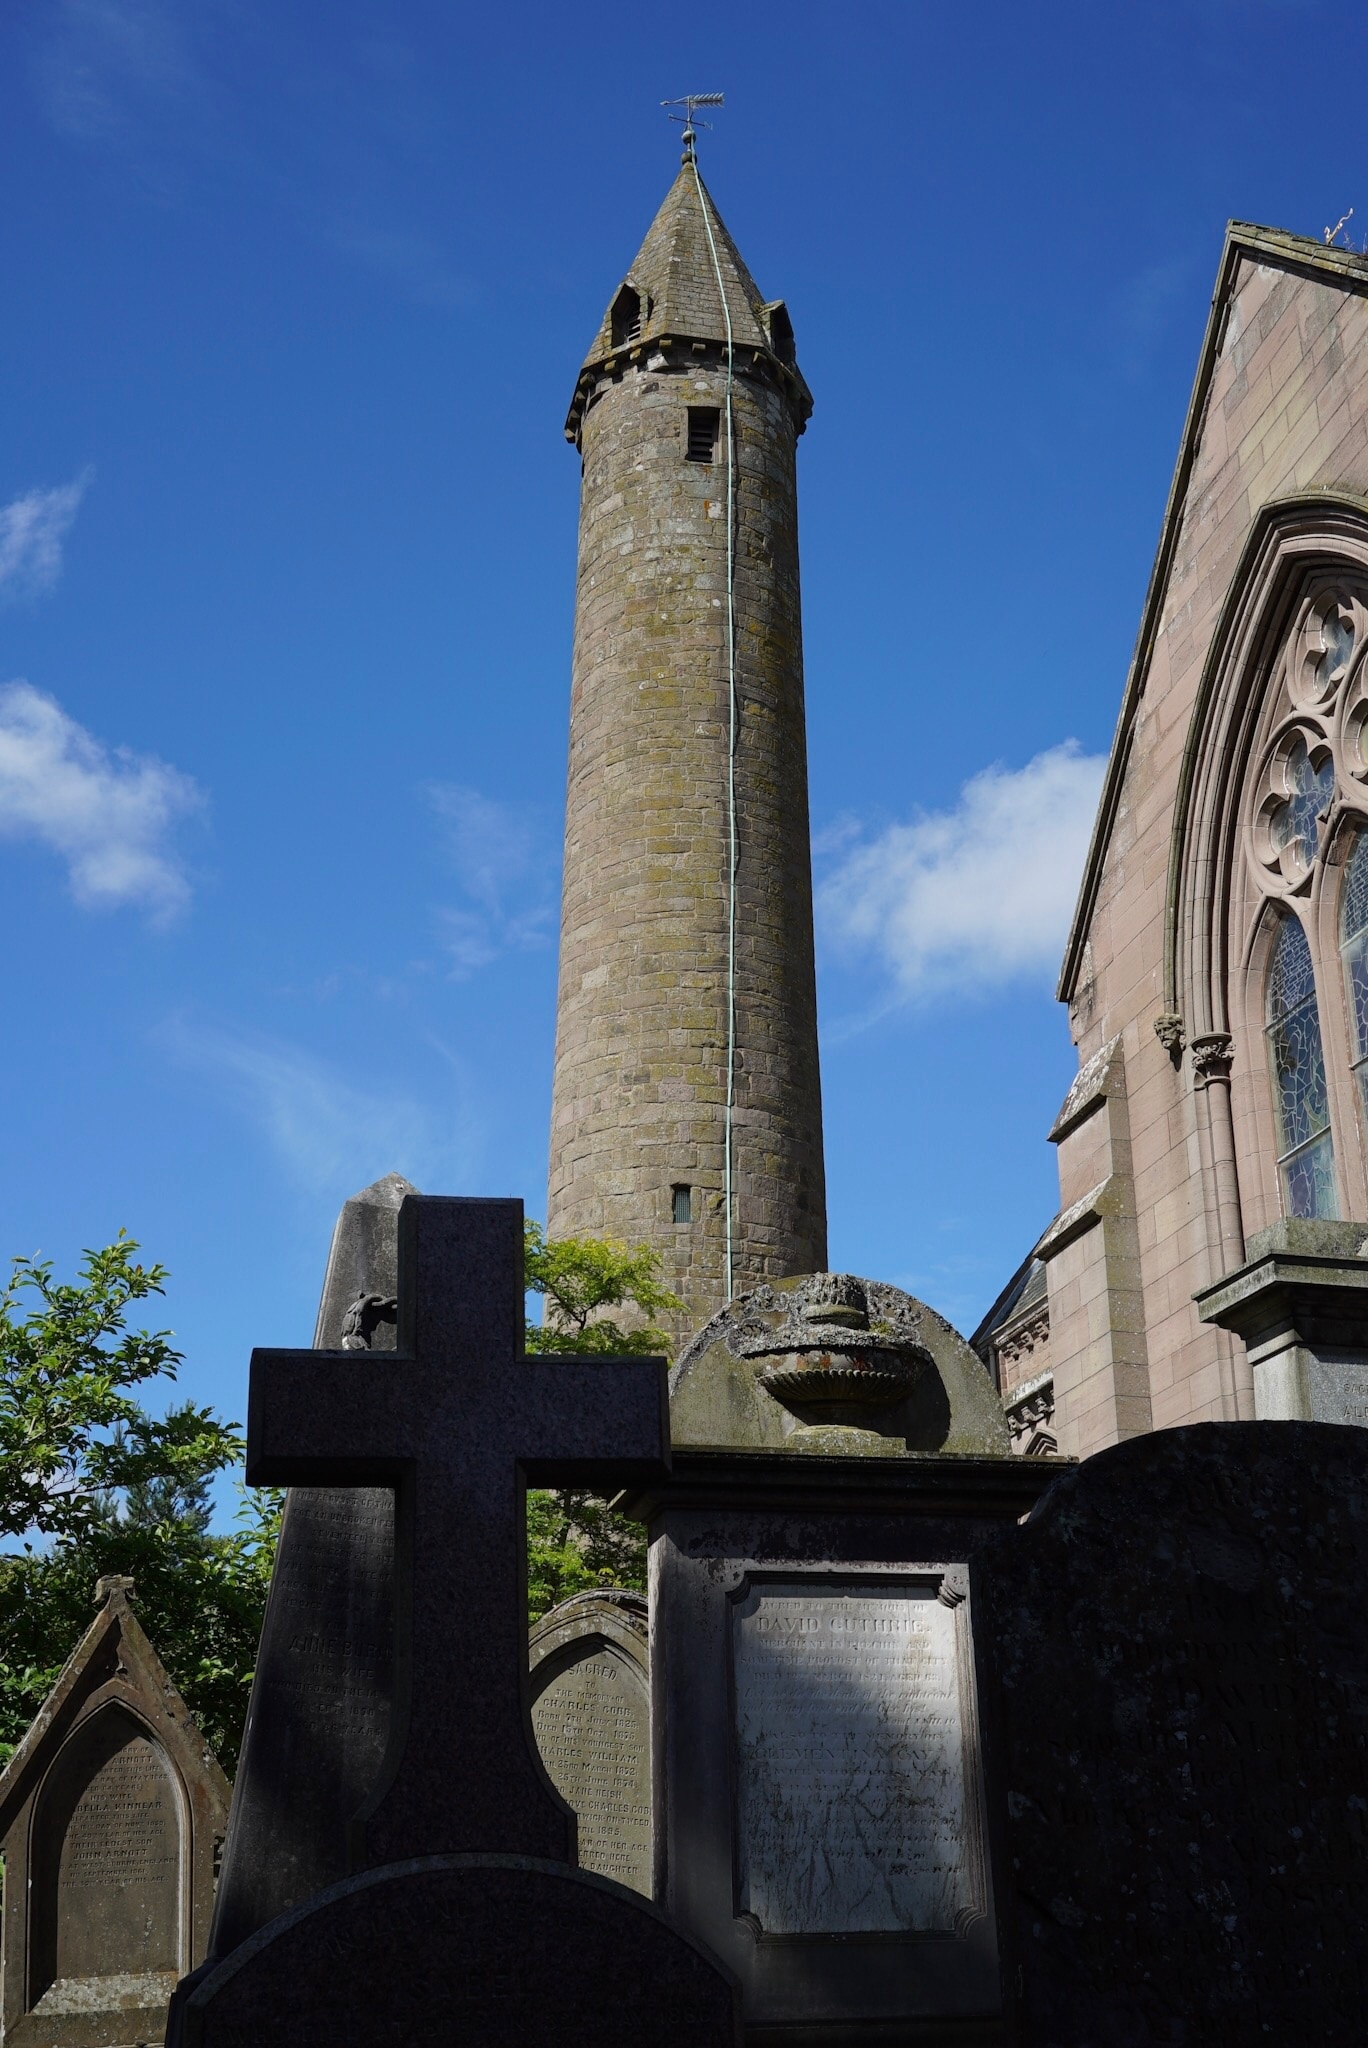 Brechin Cathedral, Brechin, Scotland
One of 2 remaining round towers in Scotland dating in the 11th century